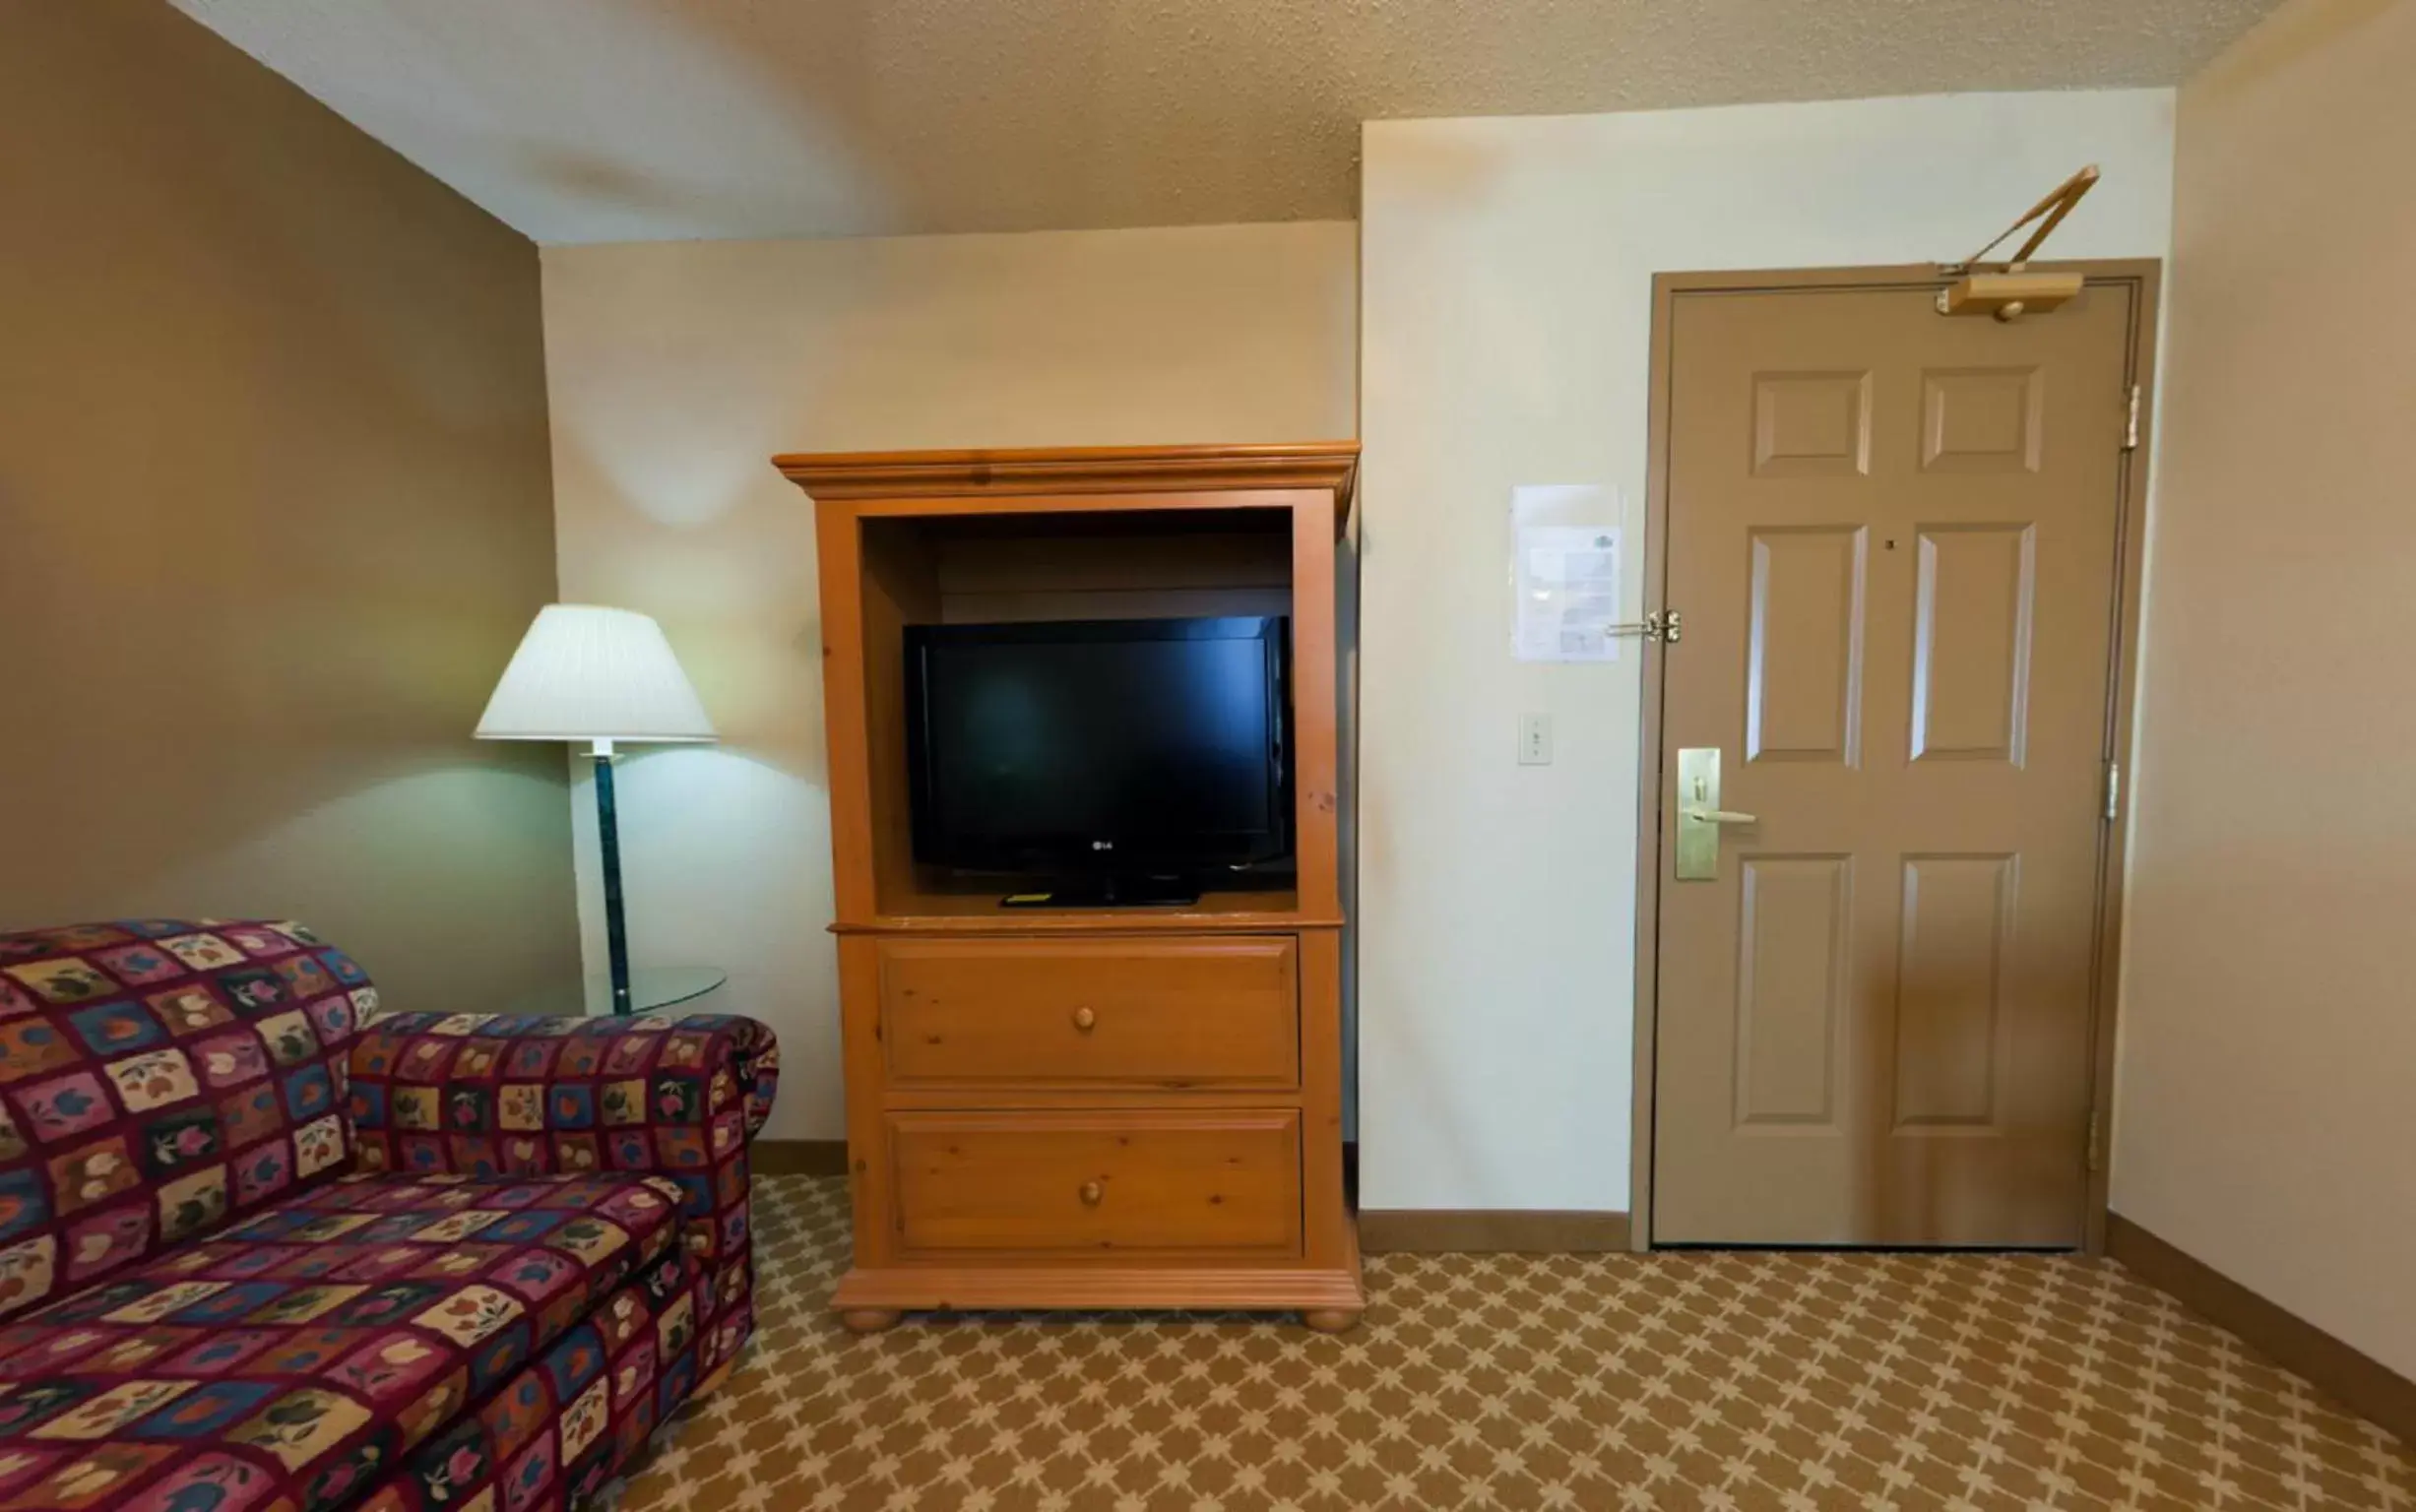 People, TV/Entertainment Center in AmericInn by Wyndham, Galesburg, IL